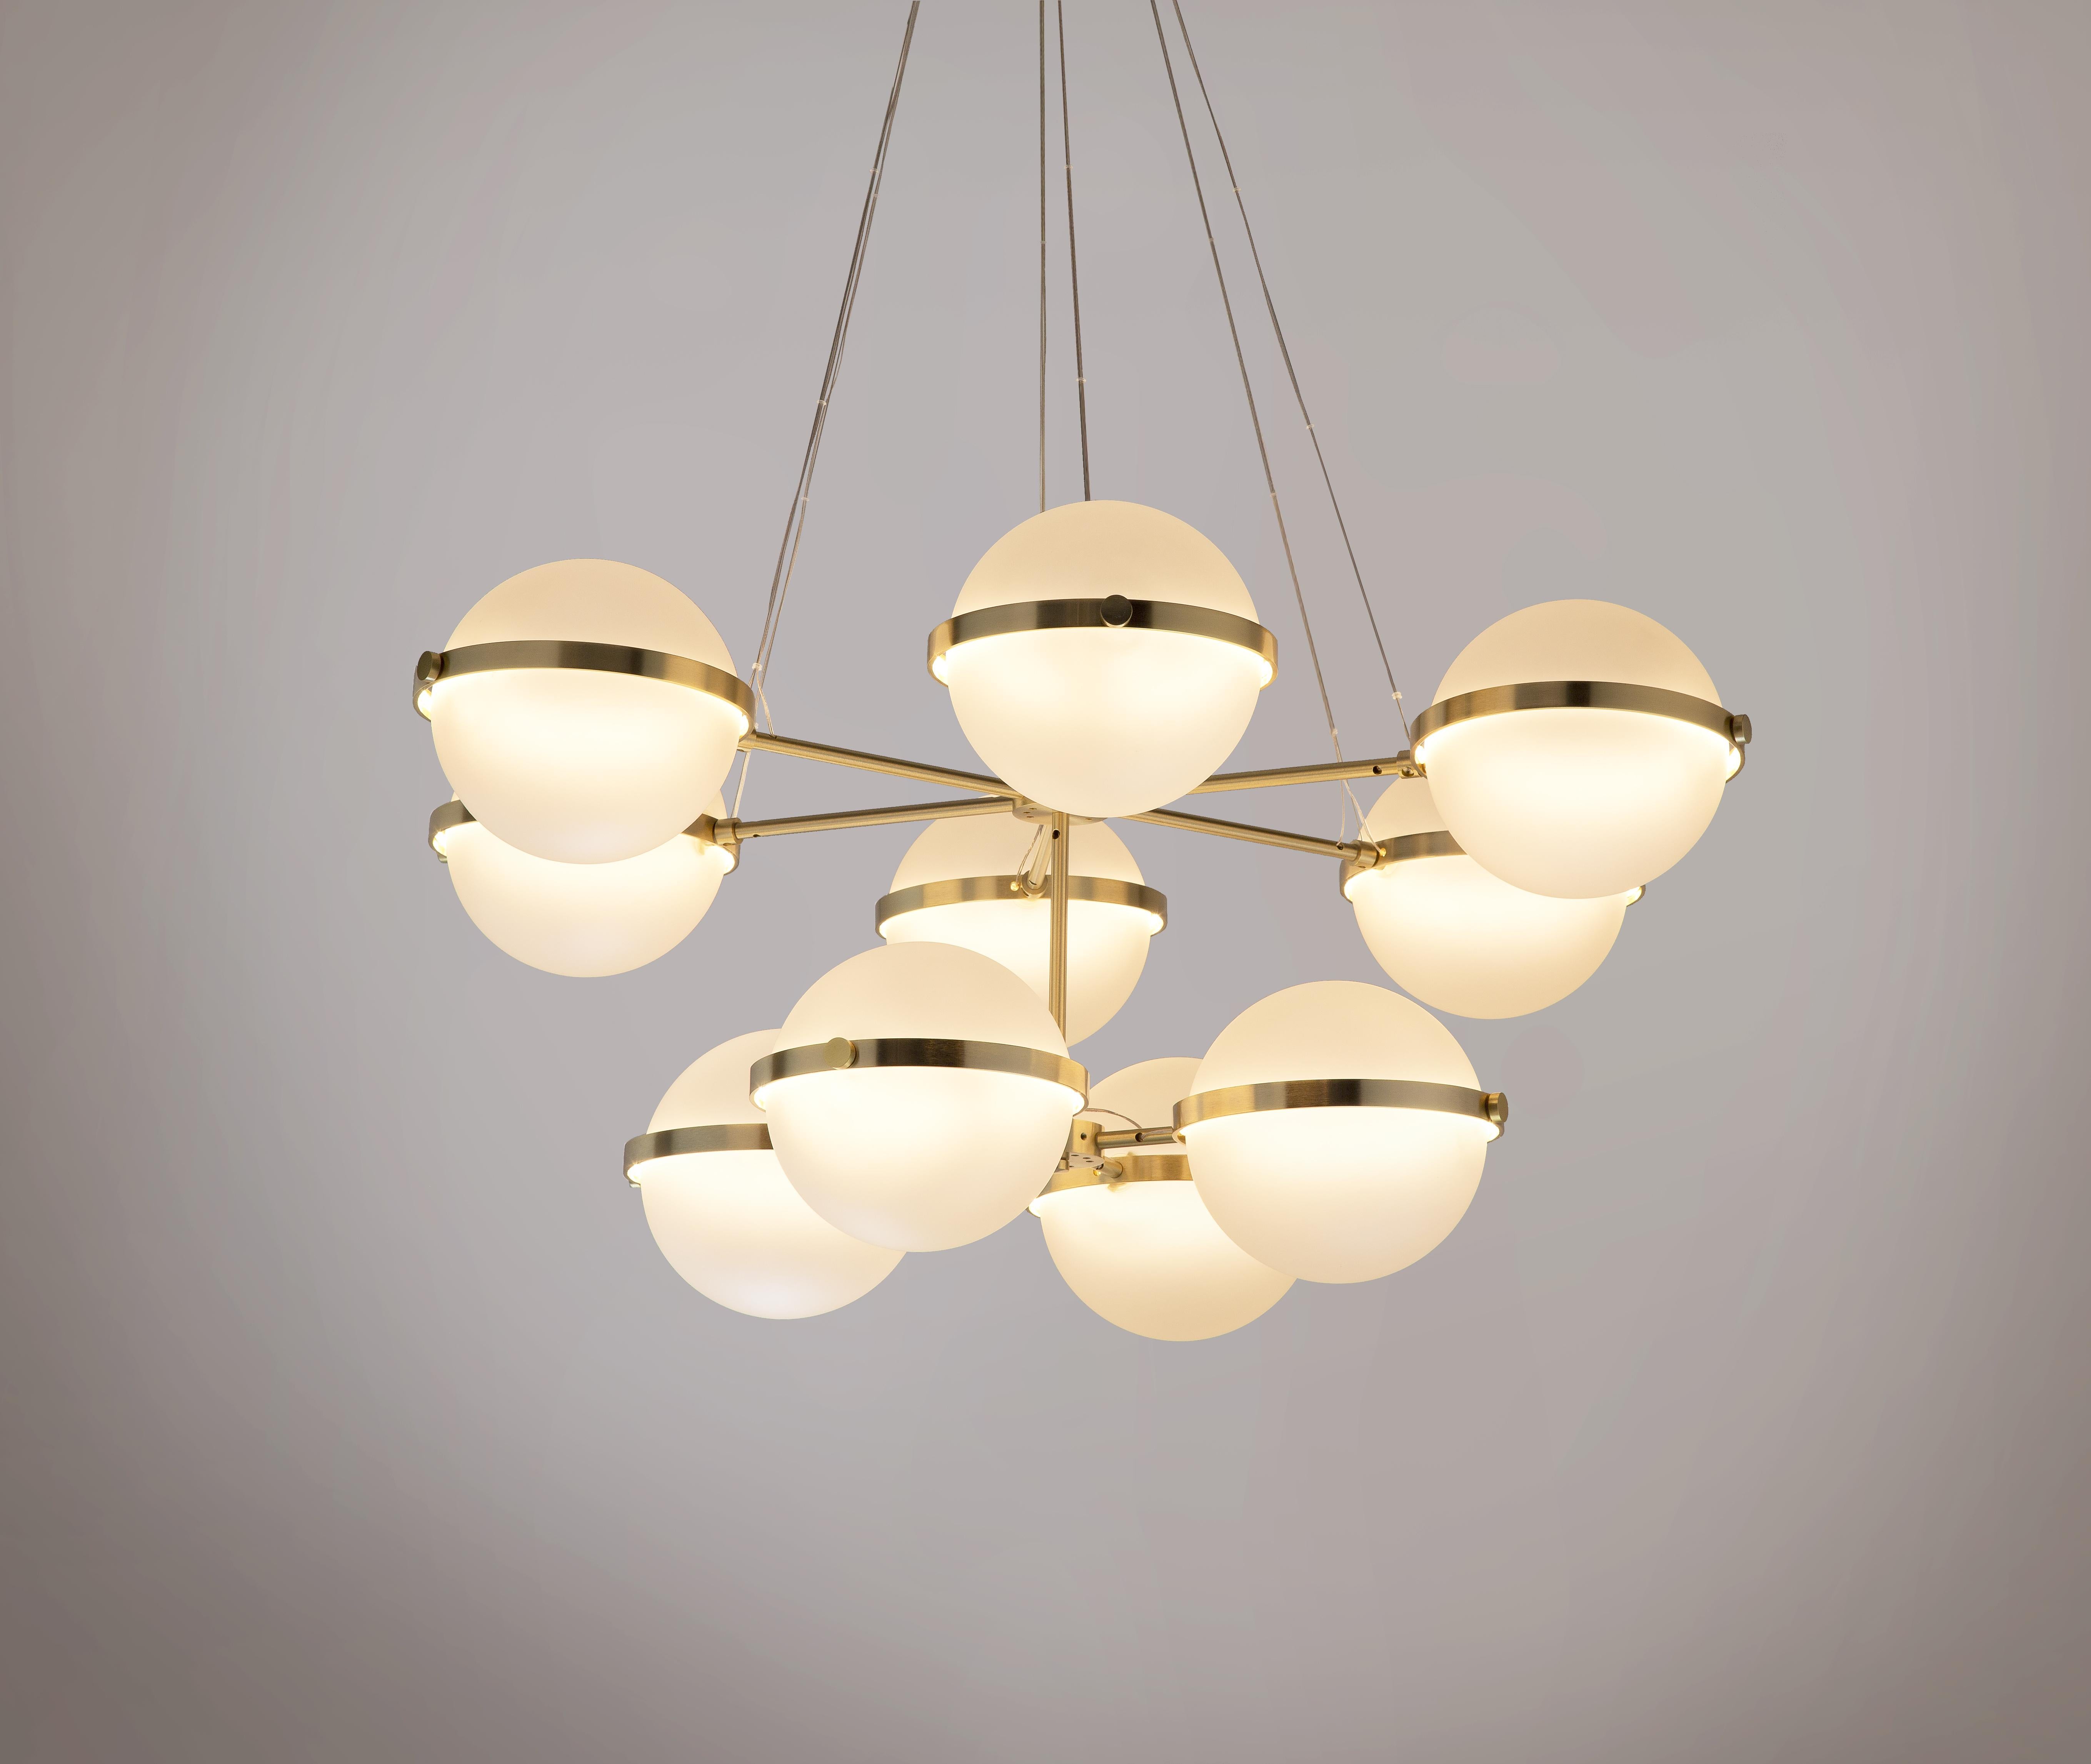 The Polaris TX 64 Pendant belongs to the Flexus series by Baroncelli.

Flexus is a lighting system that comprises a palette of abstracted lines, curves and circles. Echoing the language of Modernist modular thinking, it captures the desire to